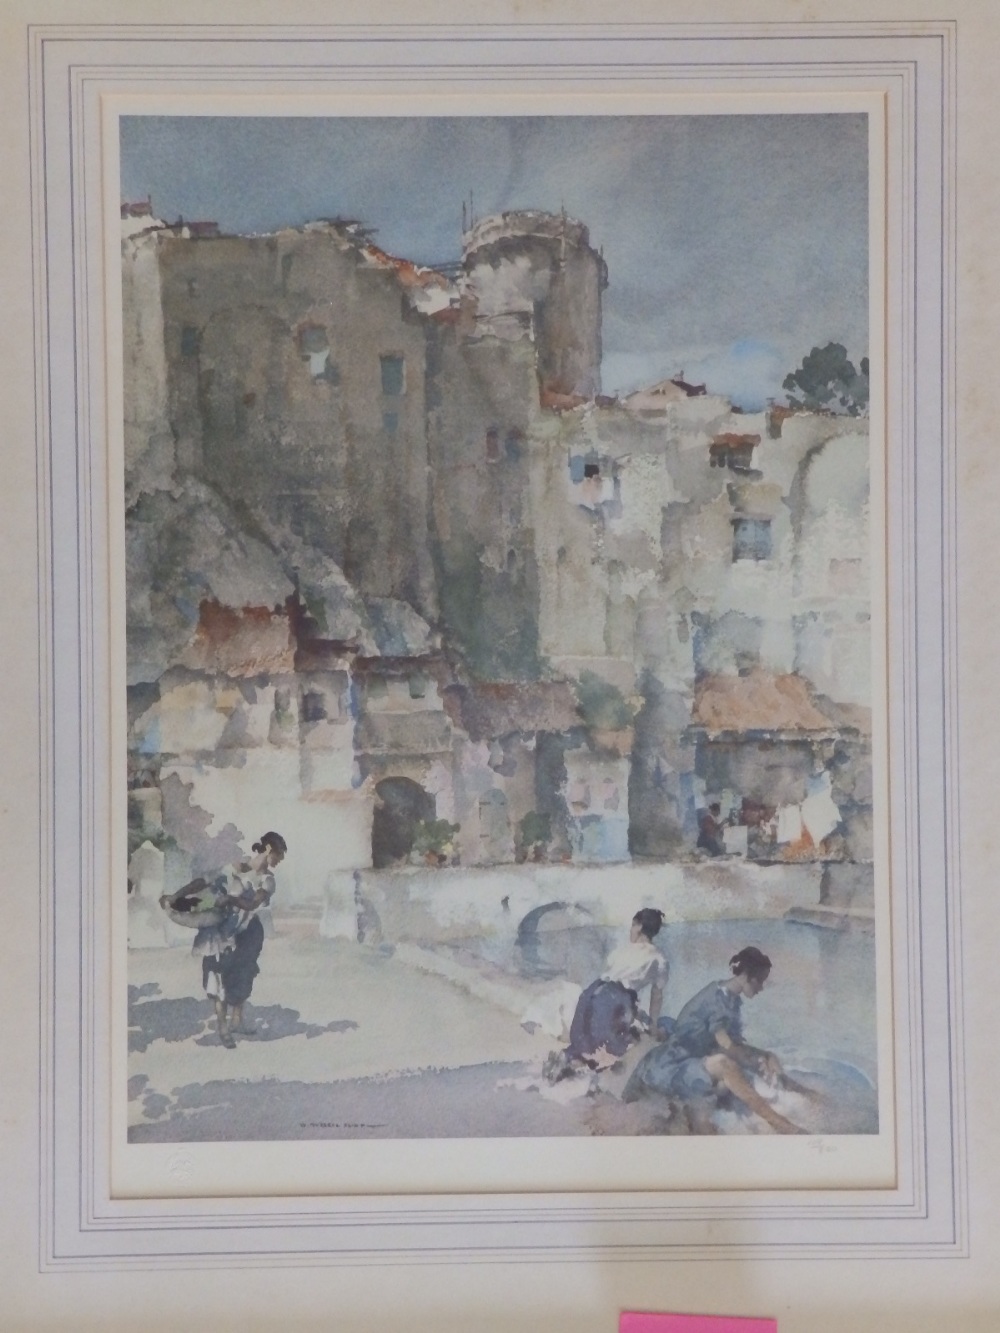 A signed Russell Flint colour print – Peasant girls in a Mediterranean town, 109/850, 19.5” x 14”.